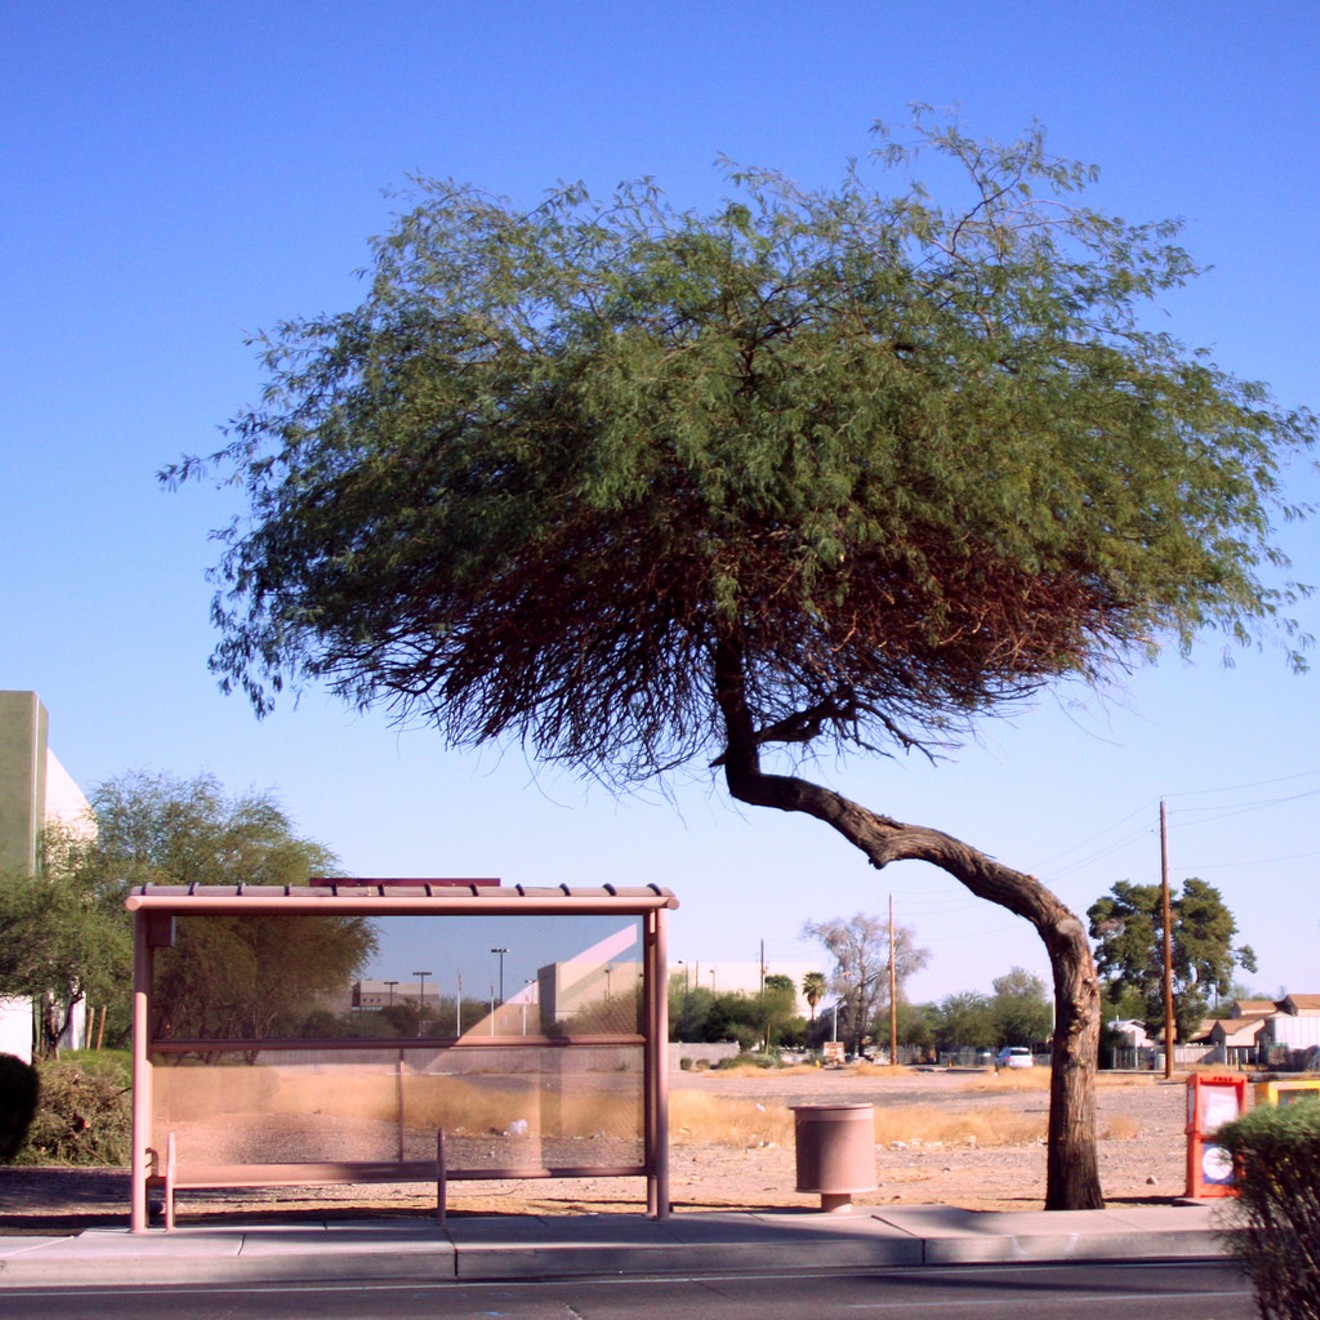 A citizen-led effort is trying to push the city of Phoenix to make good on an 8-year-old plan to use more trees for shade.